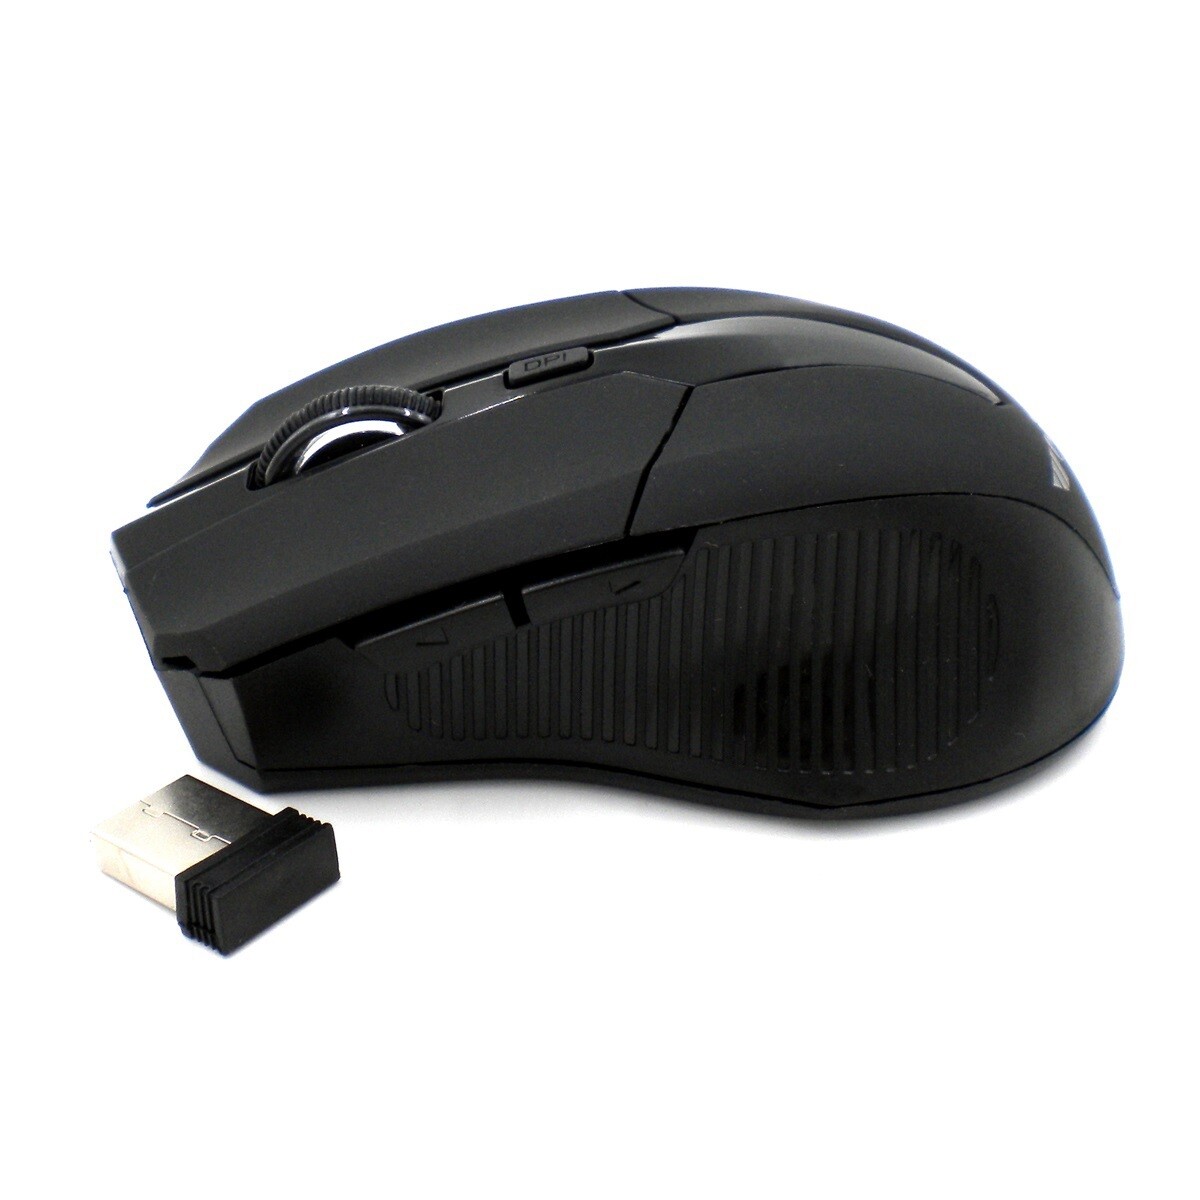 WIRELESS OPTICAL 3 BUTTON MOUSE 2.4GHZ